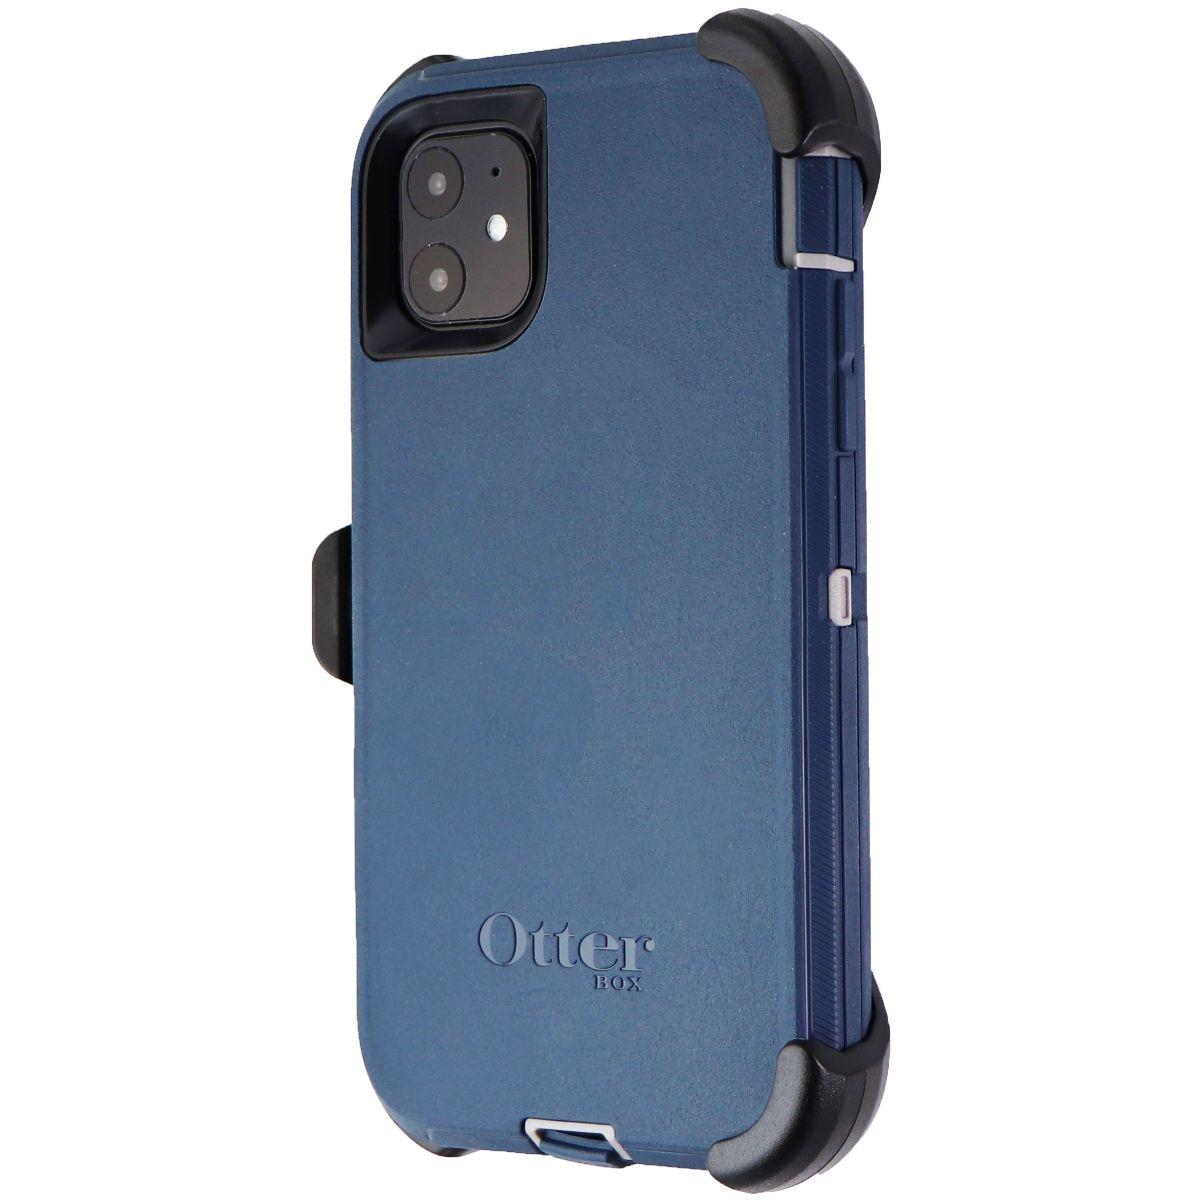 Apple iPhone 11 or 12 OtterBox Case for 20% Off